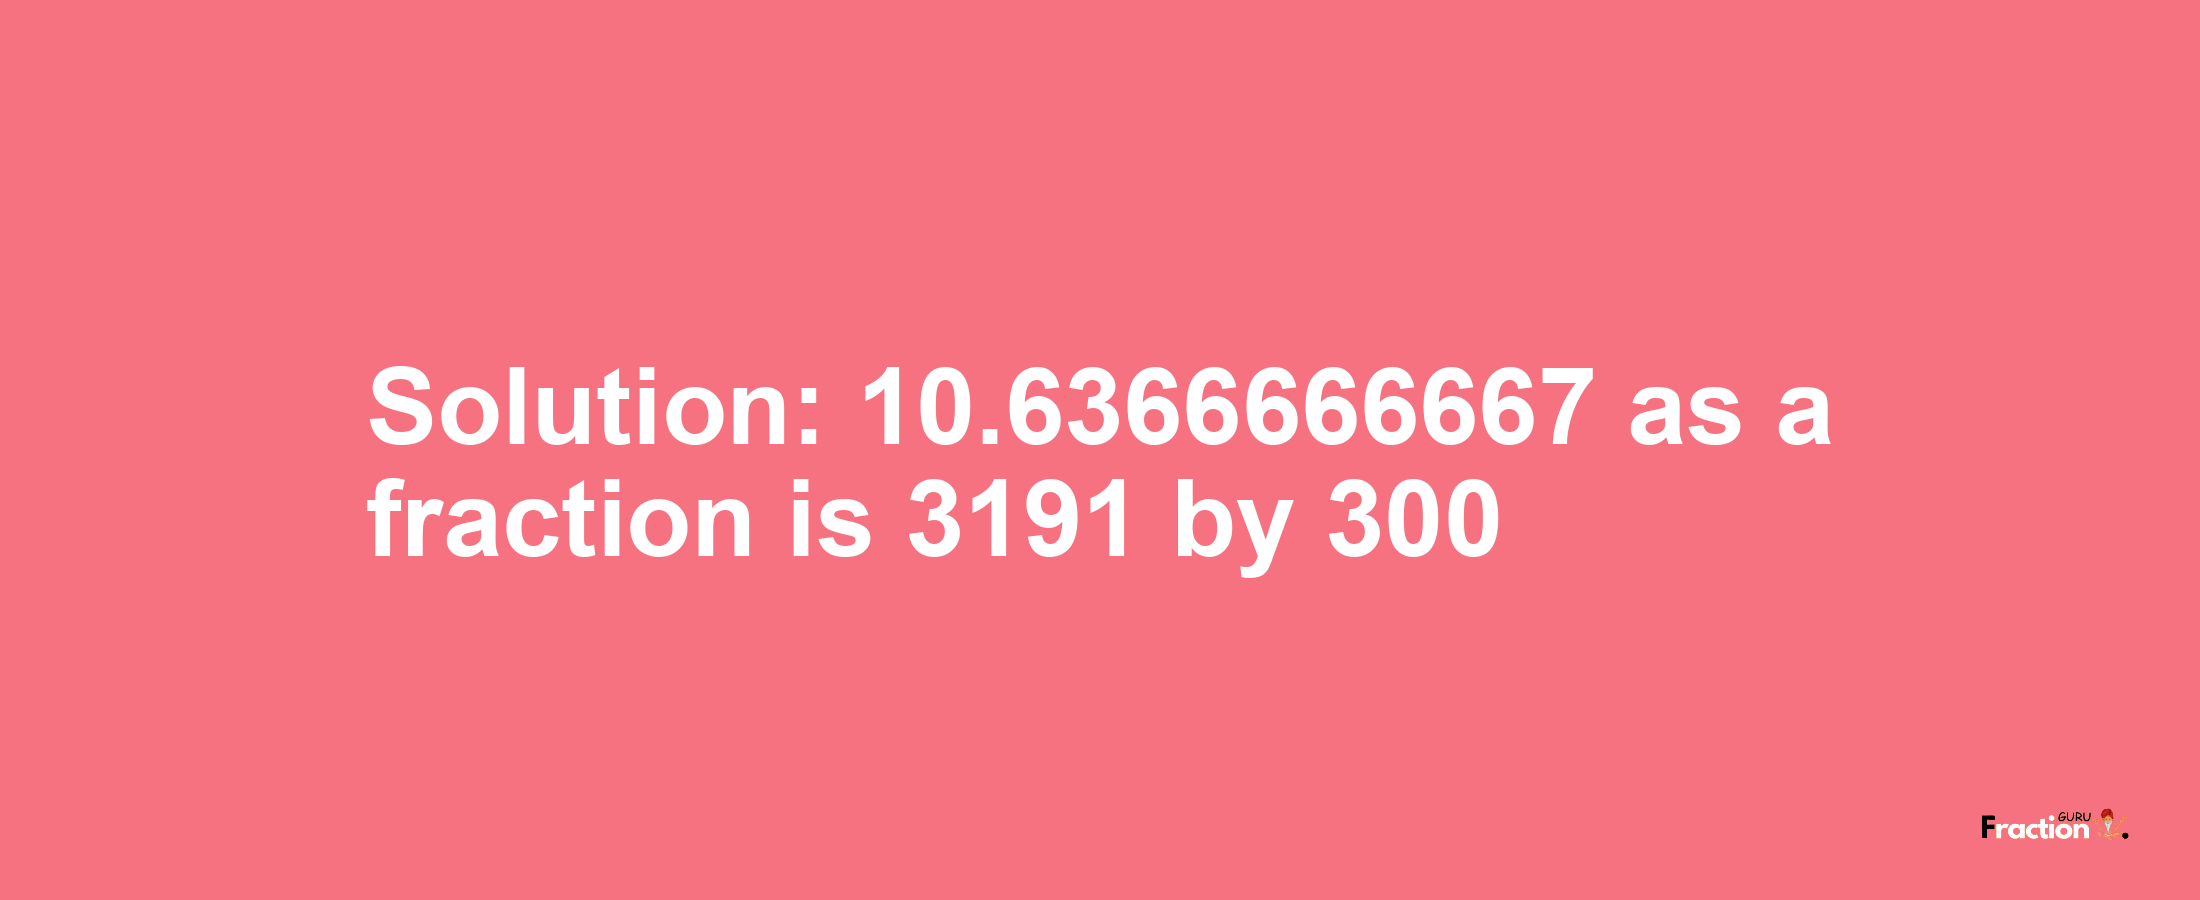 Solution:10.6366666667 as a fraction is 3191/300